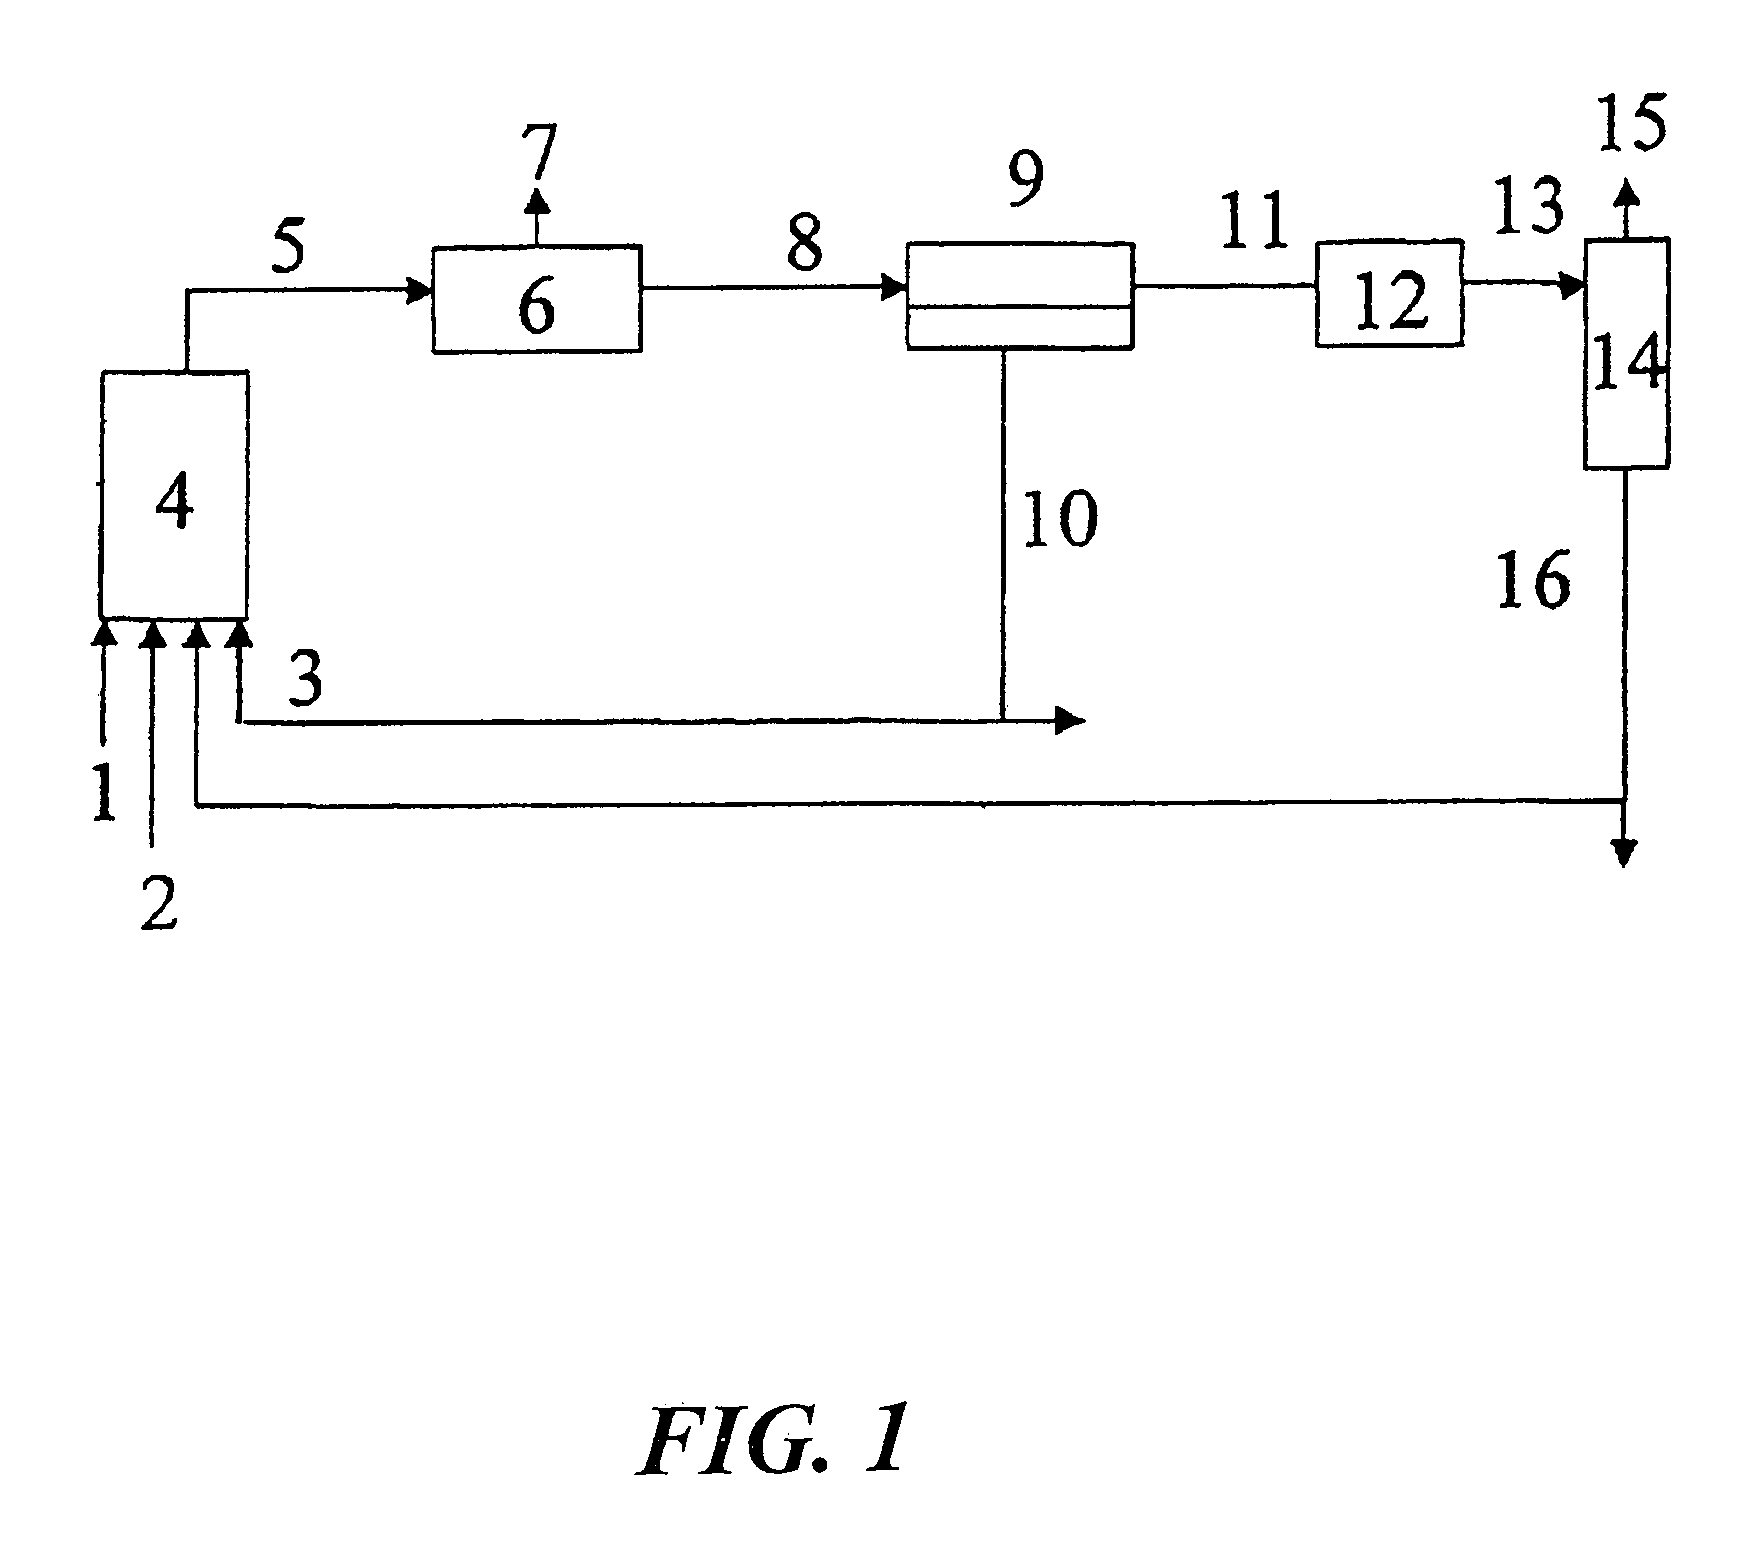 Method for producing aldehydes by means of hydroformylation of olefinically unsaturated compounds, said hydroformylation being catalyzed by unmodified metal complexes in the presence of cyclic carbonic acid esters